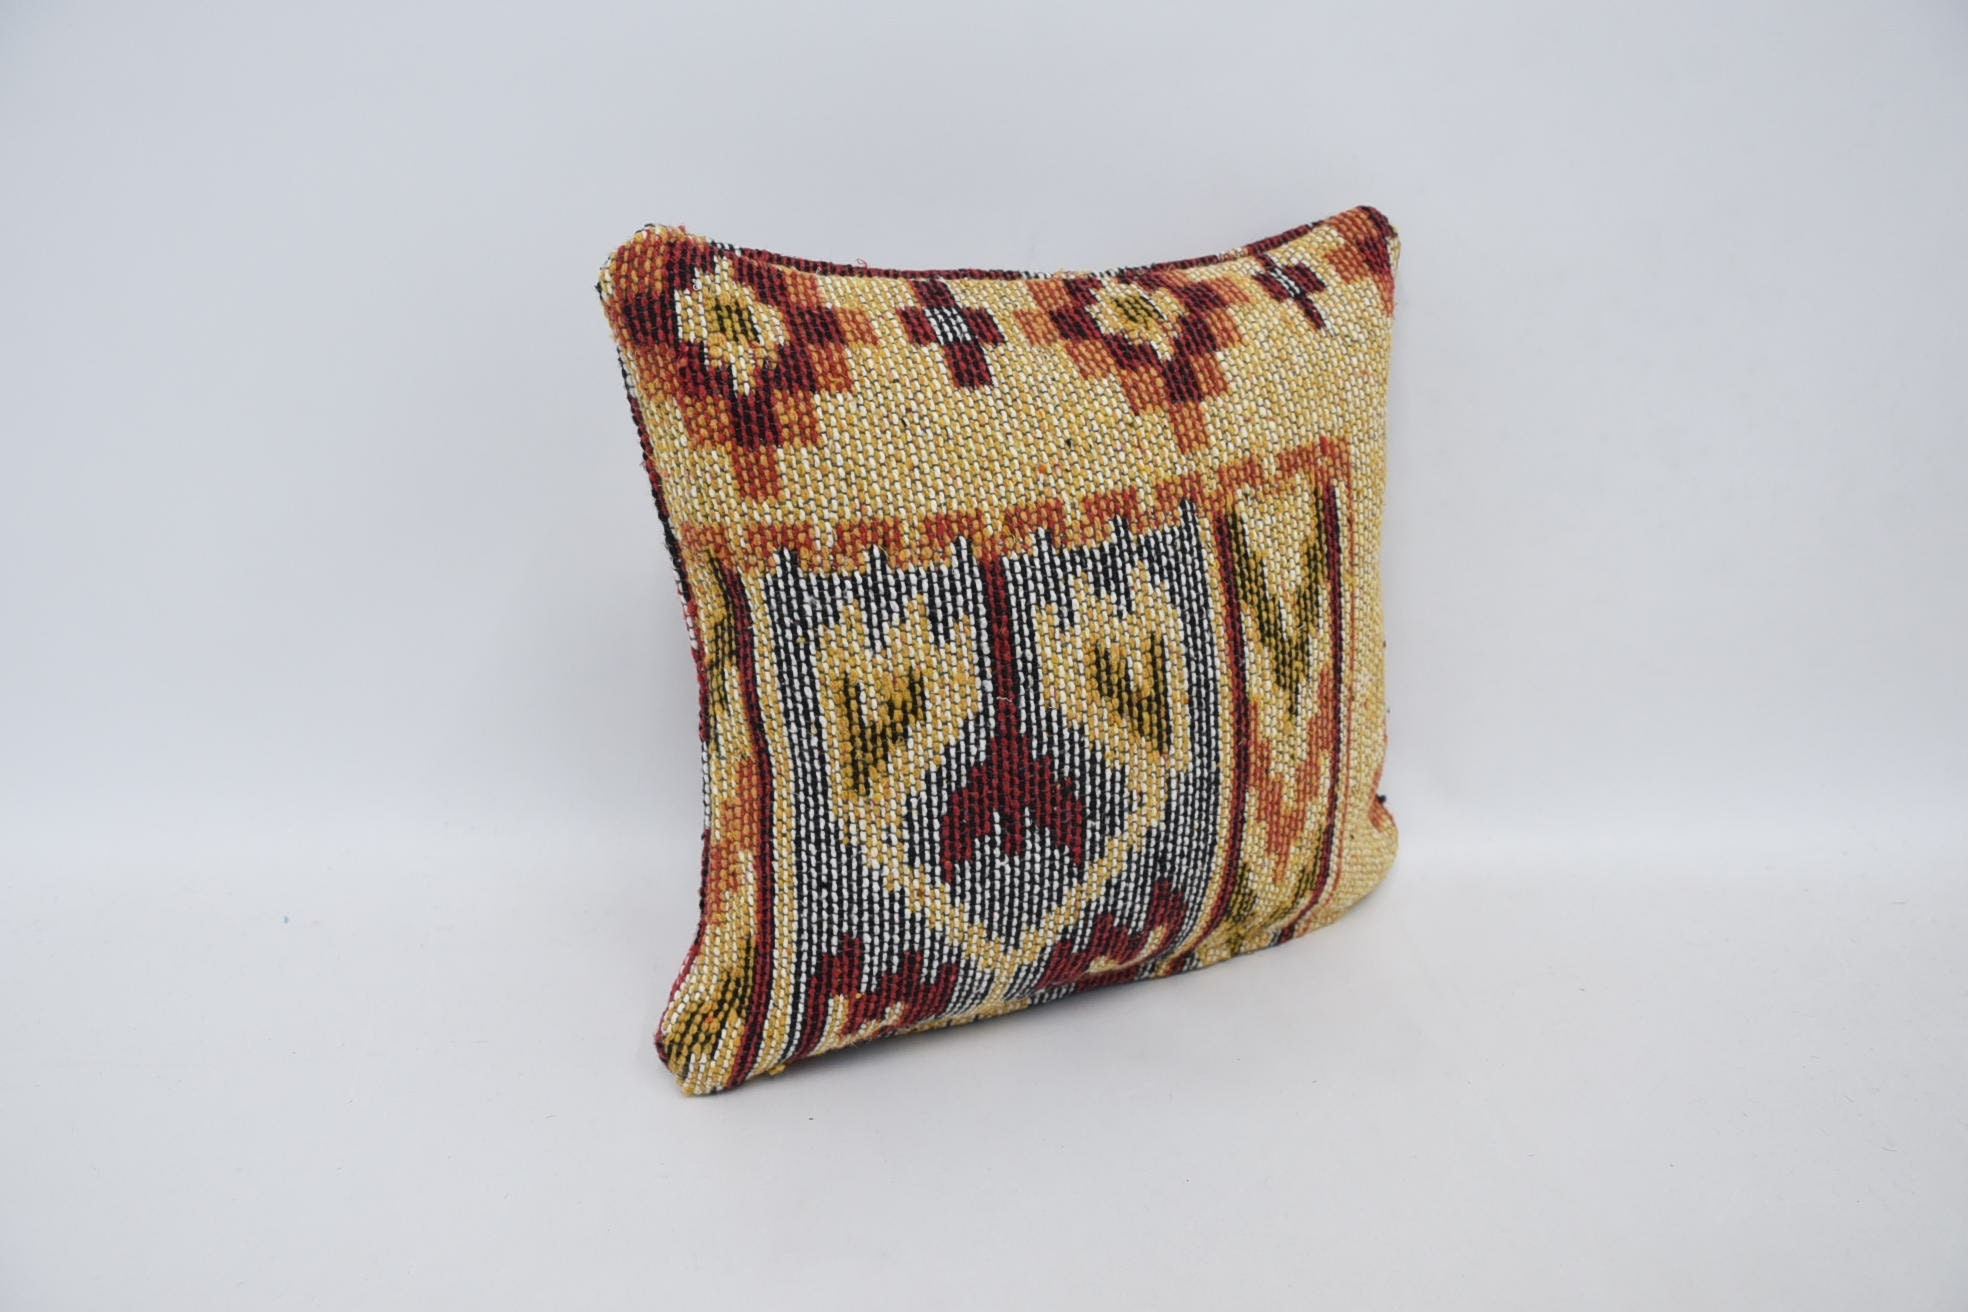 Interior Designer Pillow, 12"x12" Red Pillow Cover, Customized Cushion Cover, Vintage Kilim Pillow, Pillow for Sofa, Indoor Pillow Cover